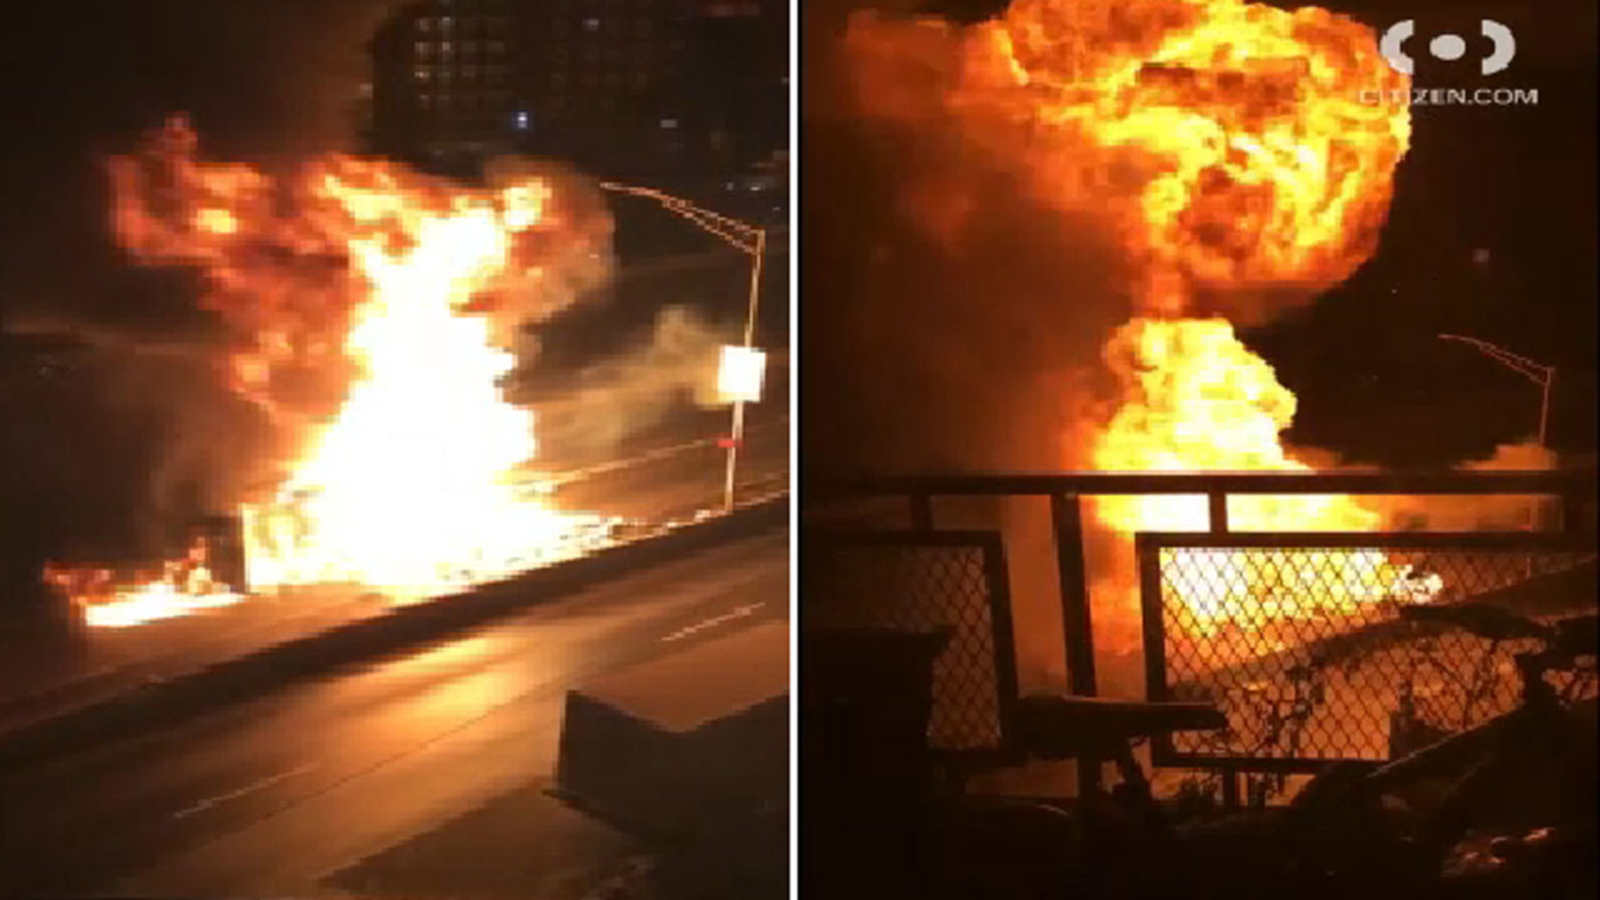 Long Island Expressway crash: Propane tanks explode into flames after truck overturns